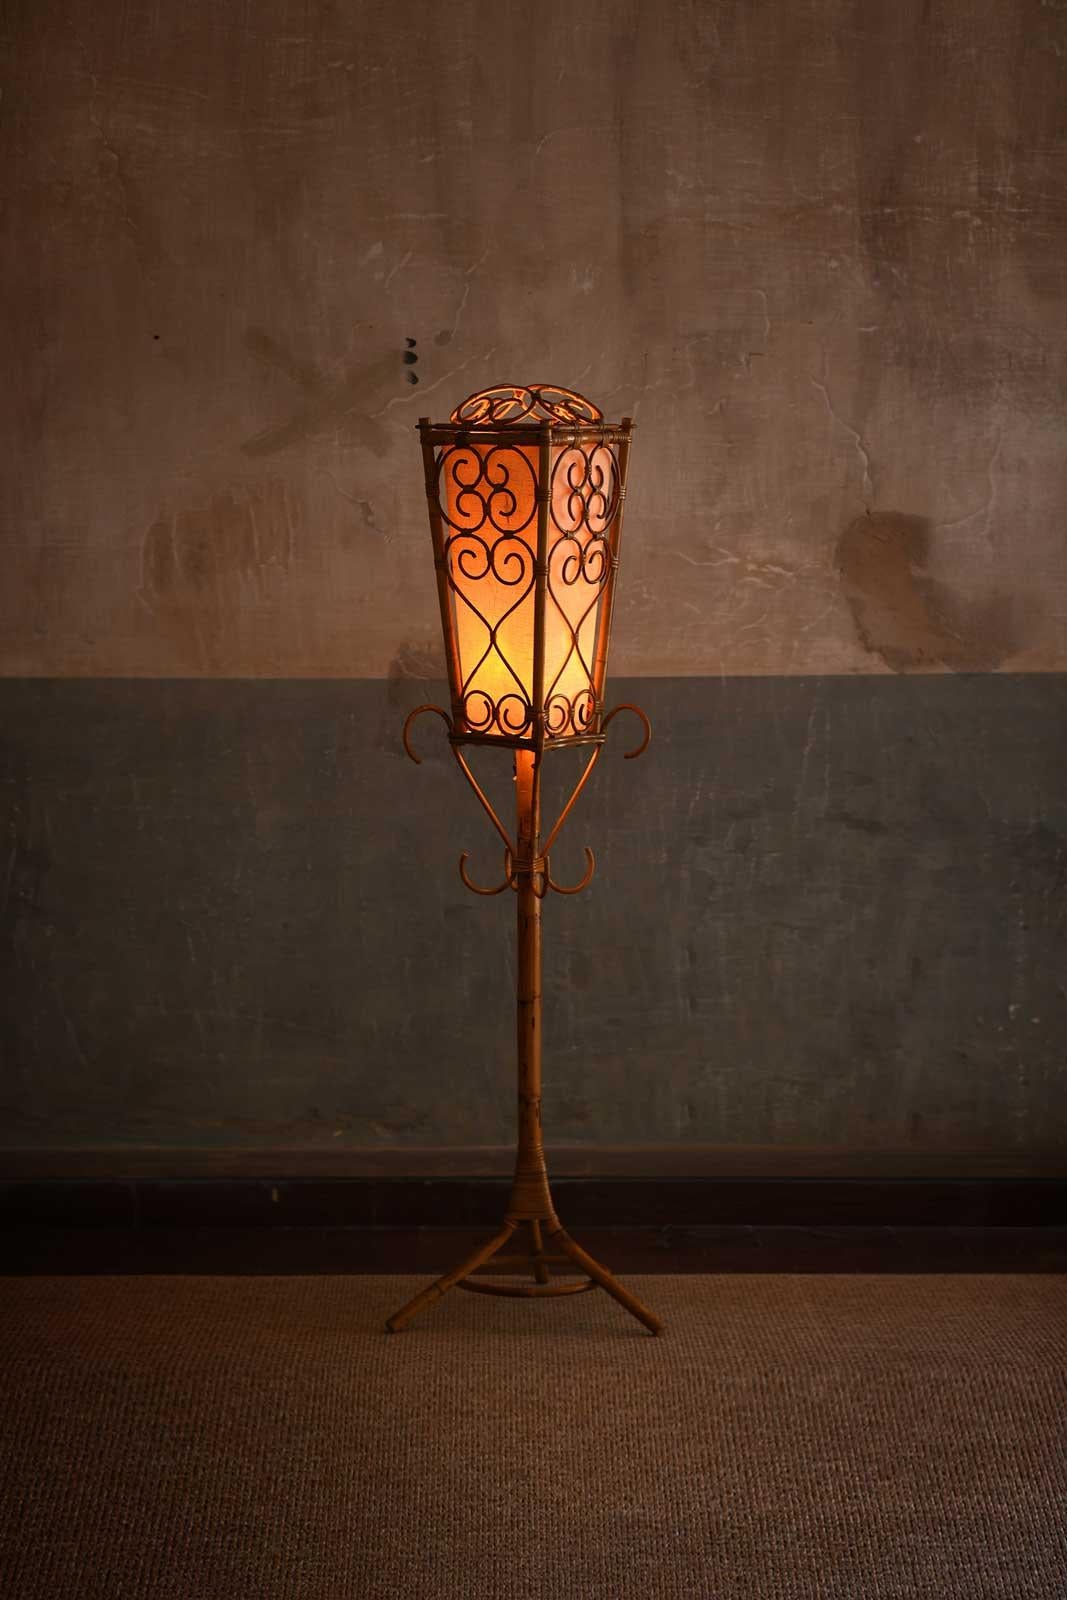 Mid Century floor lamp made of rush with geometric patterns and large lampshade
Product details
Dimensions: 52 L x 170 H x 52 D cm